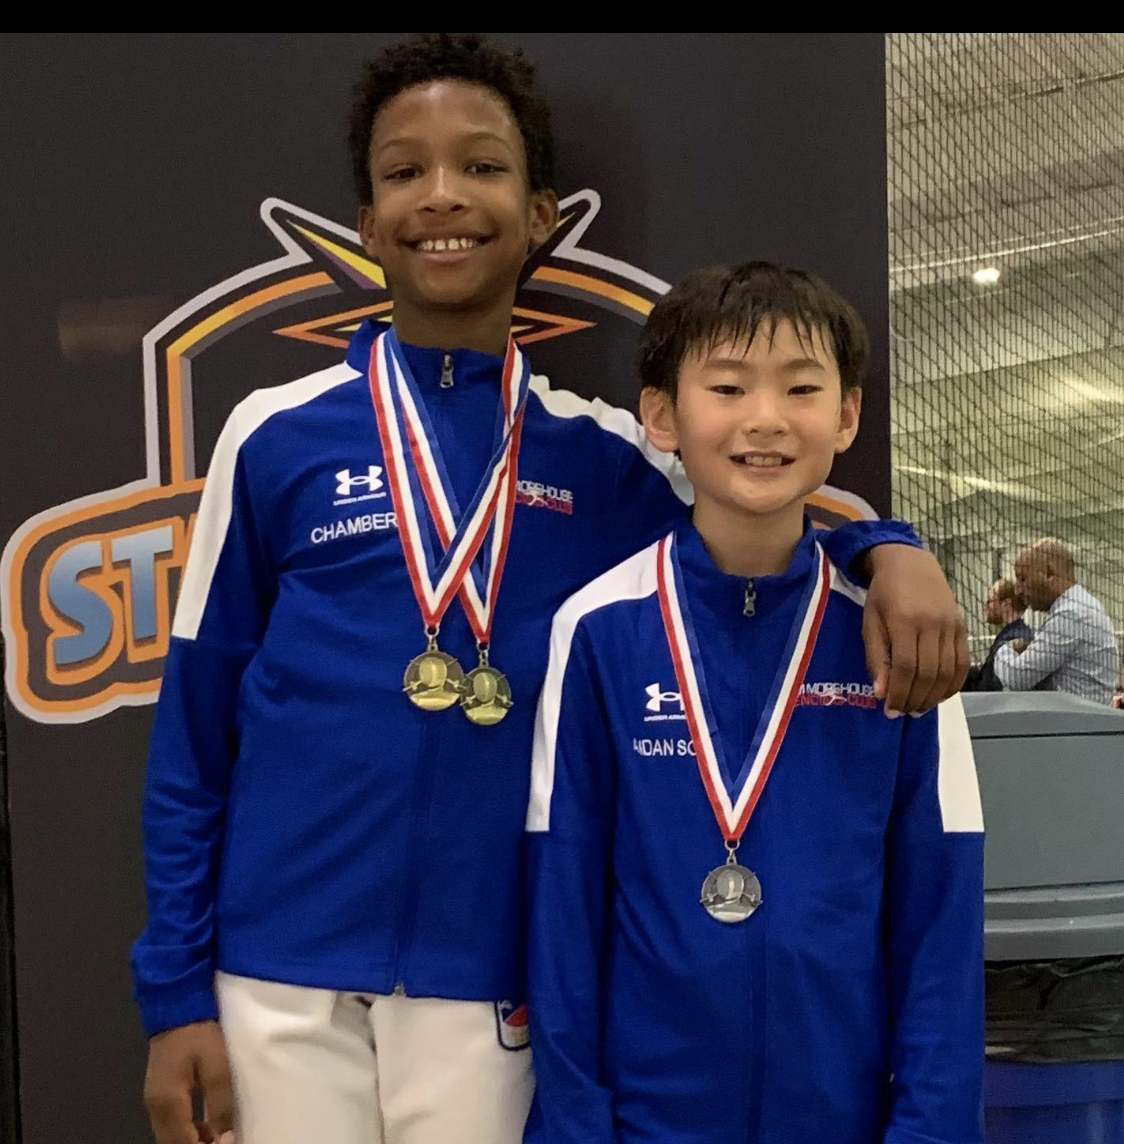 Miles Chambers, AIdan Song Medals Star Cup.png